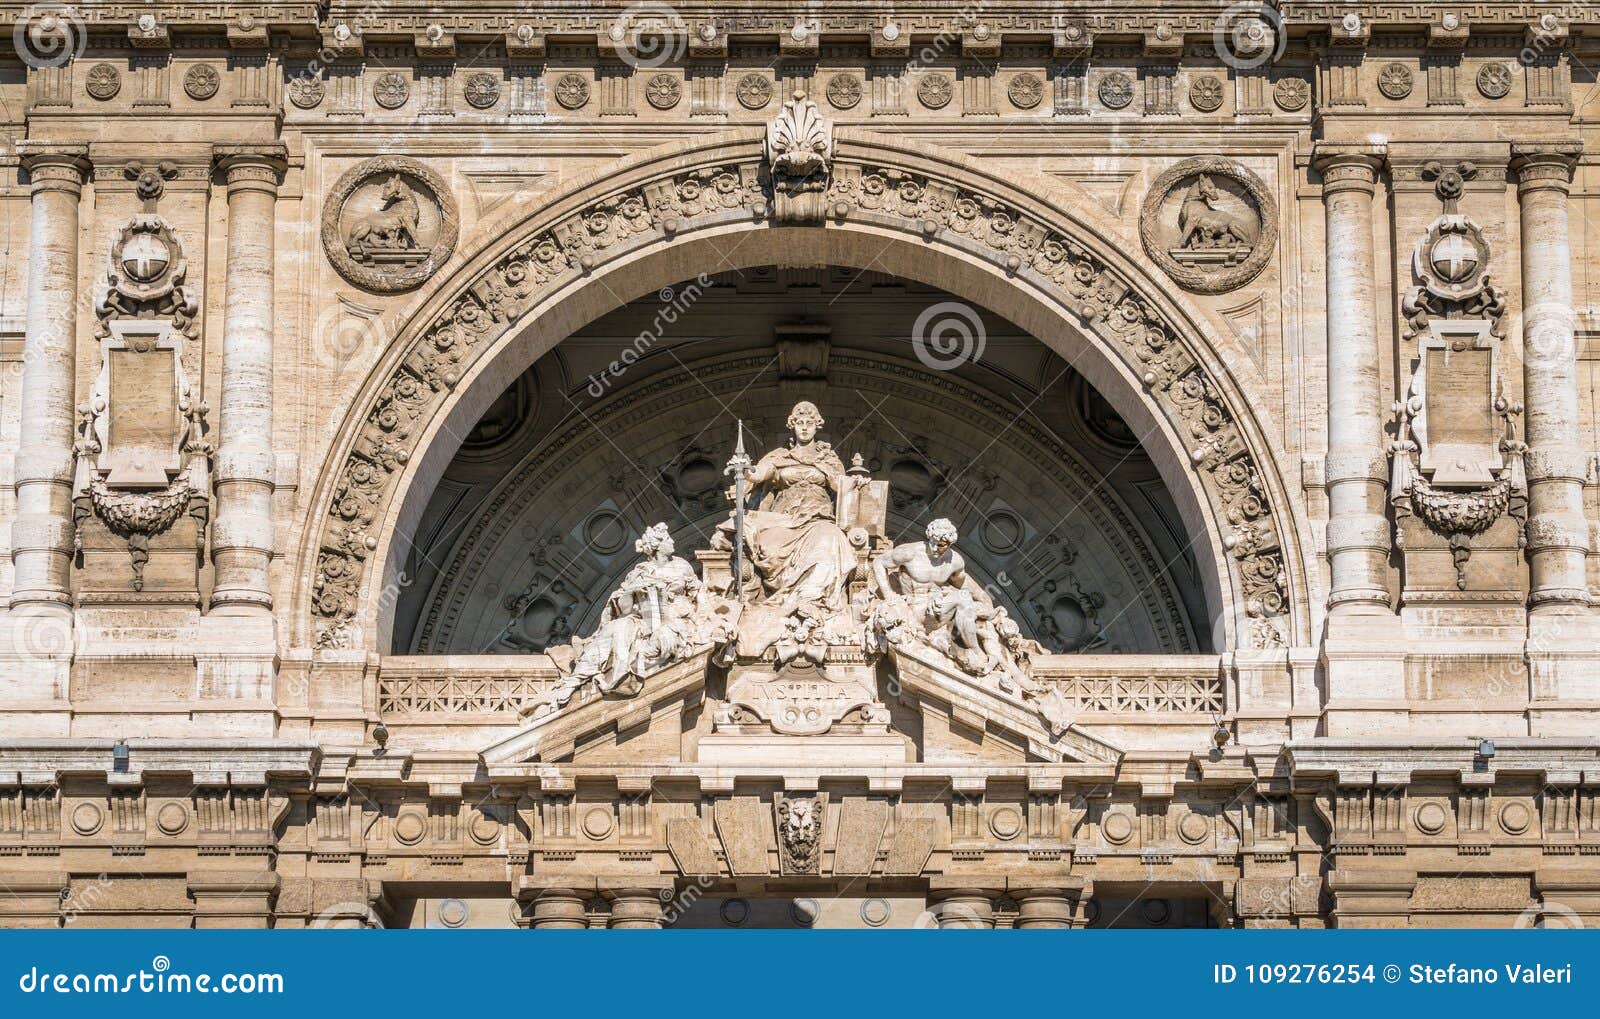 statues on the main facade of the justice palace in rome, italy.